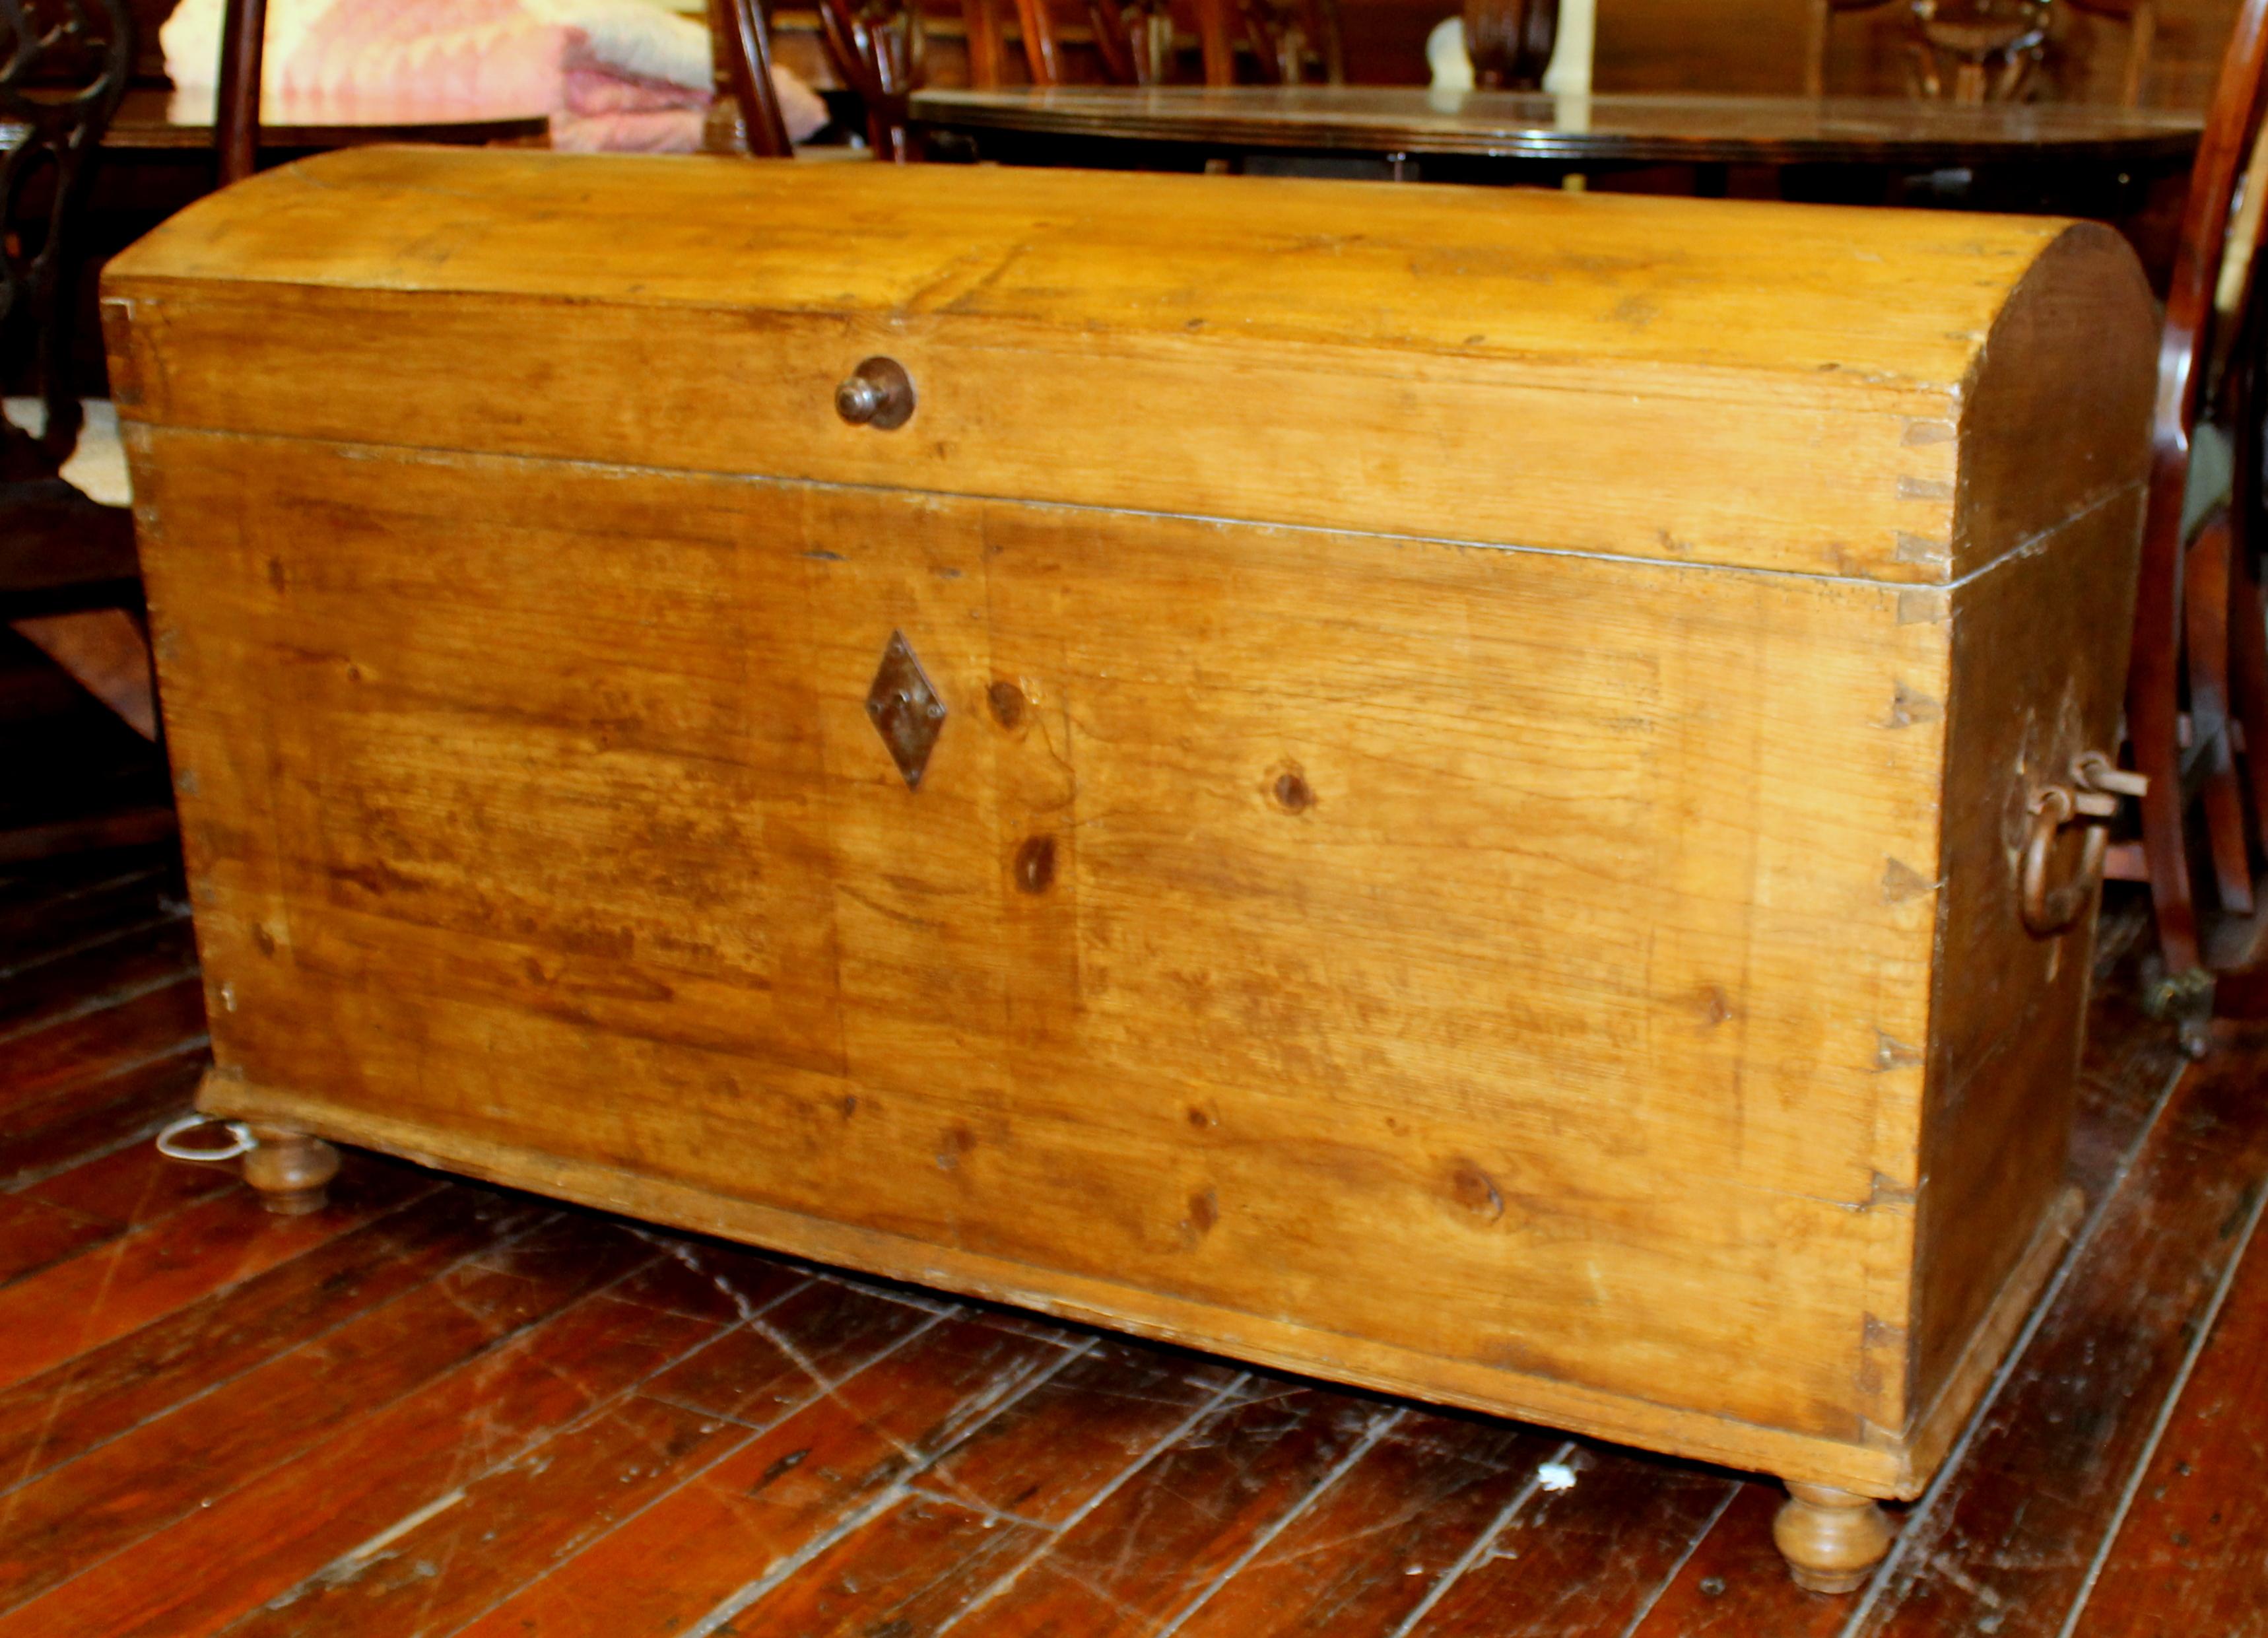 Very rare antique Scandinavian pine very larger deacon's dome-top trunk with fitted interior hinged box and wonderful, original strap iron hinges, cast iron carrying handles and nail head studs. Antique paper lining still remains in lid of trunk.